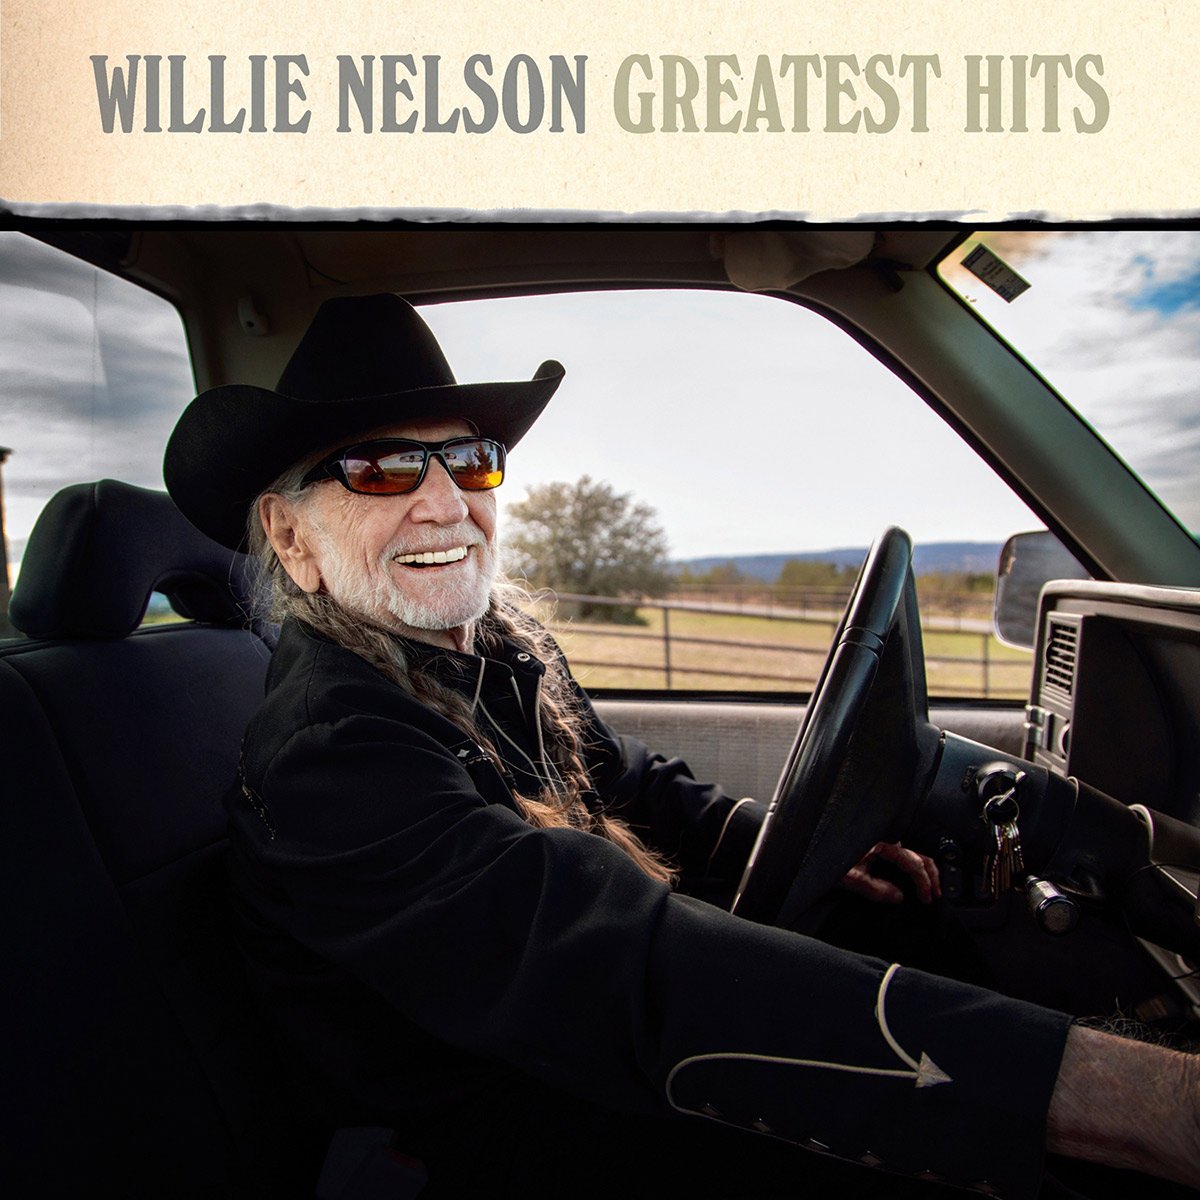 Willie Nelson’s Rock &amp; Roll Hall of Fame Induction Celebrated With Release of Greatest Hits Album November 3